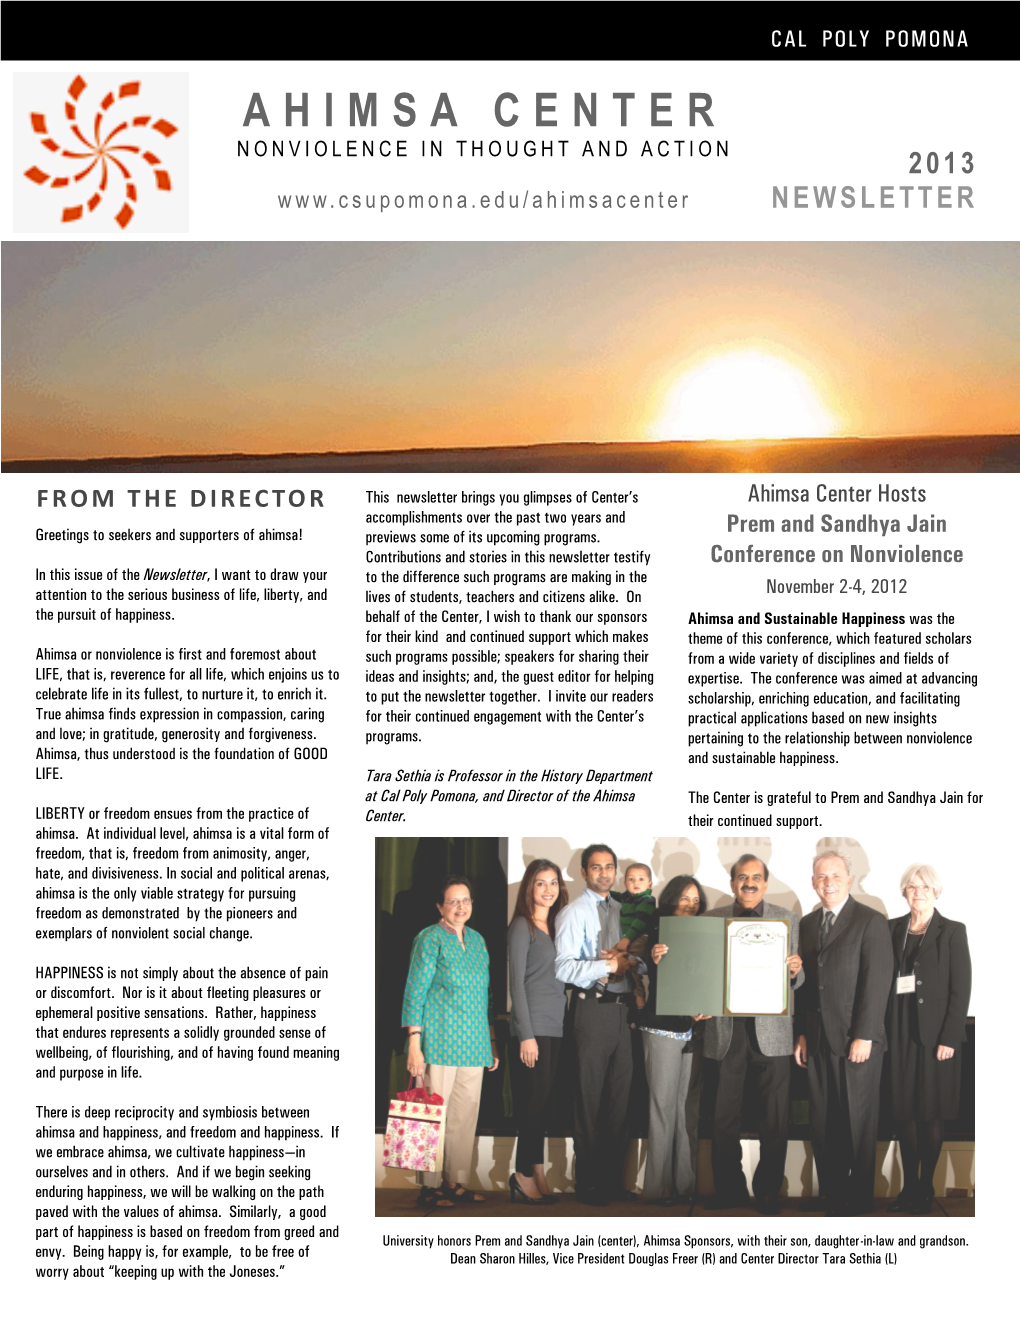 Ahimsa Center Nonviolence in Thought and Action 2013 Newsletter